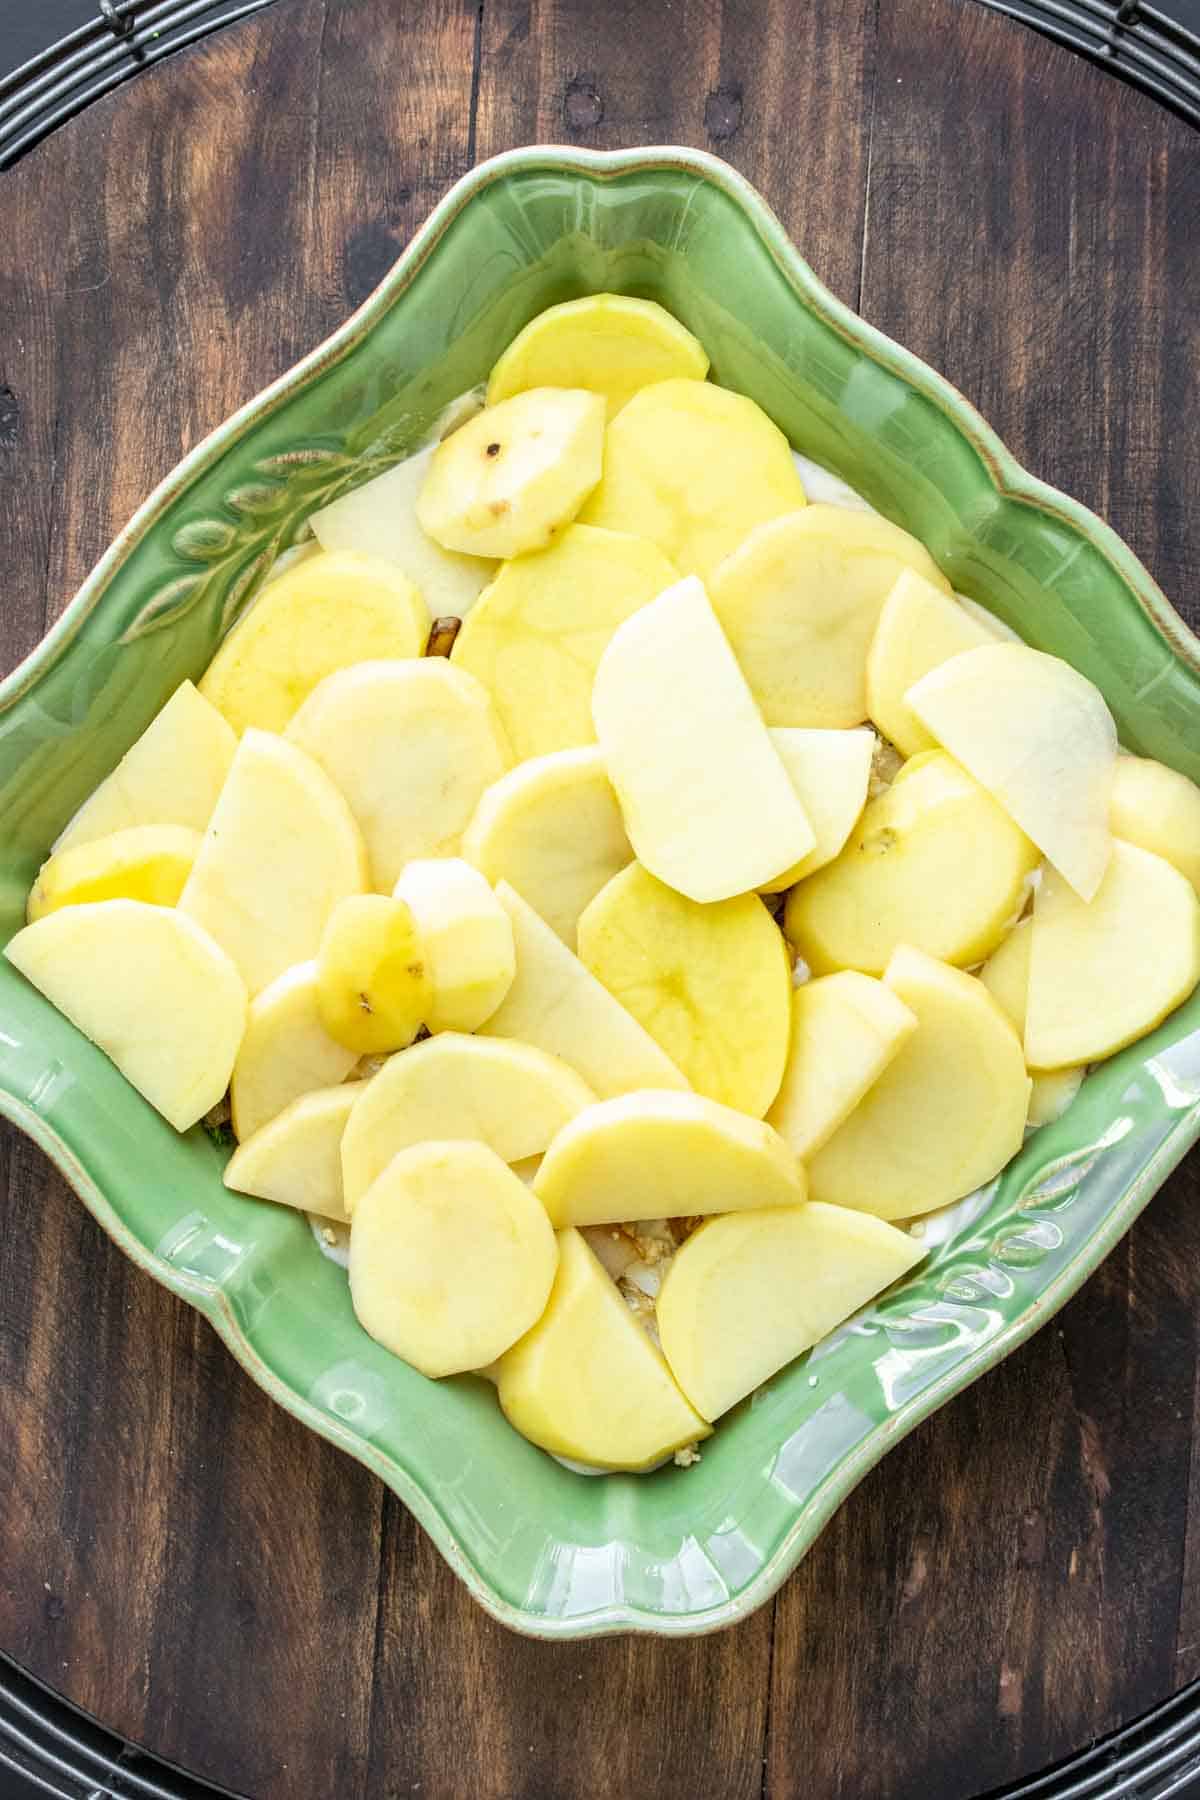 Green baking dish with slices of potatoes in it.